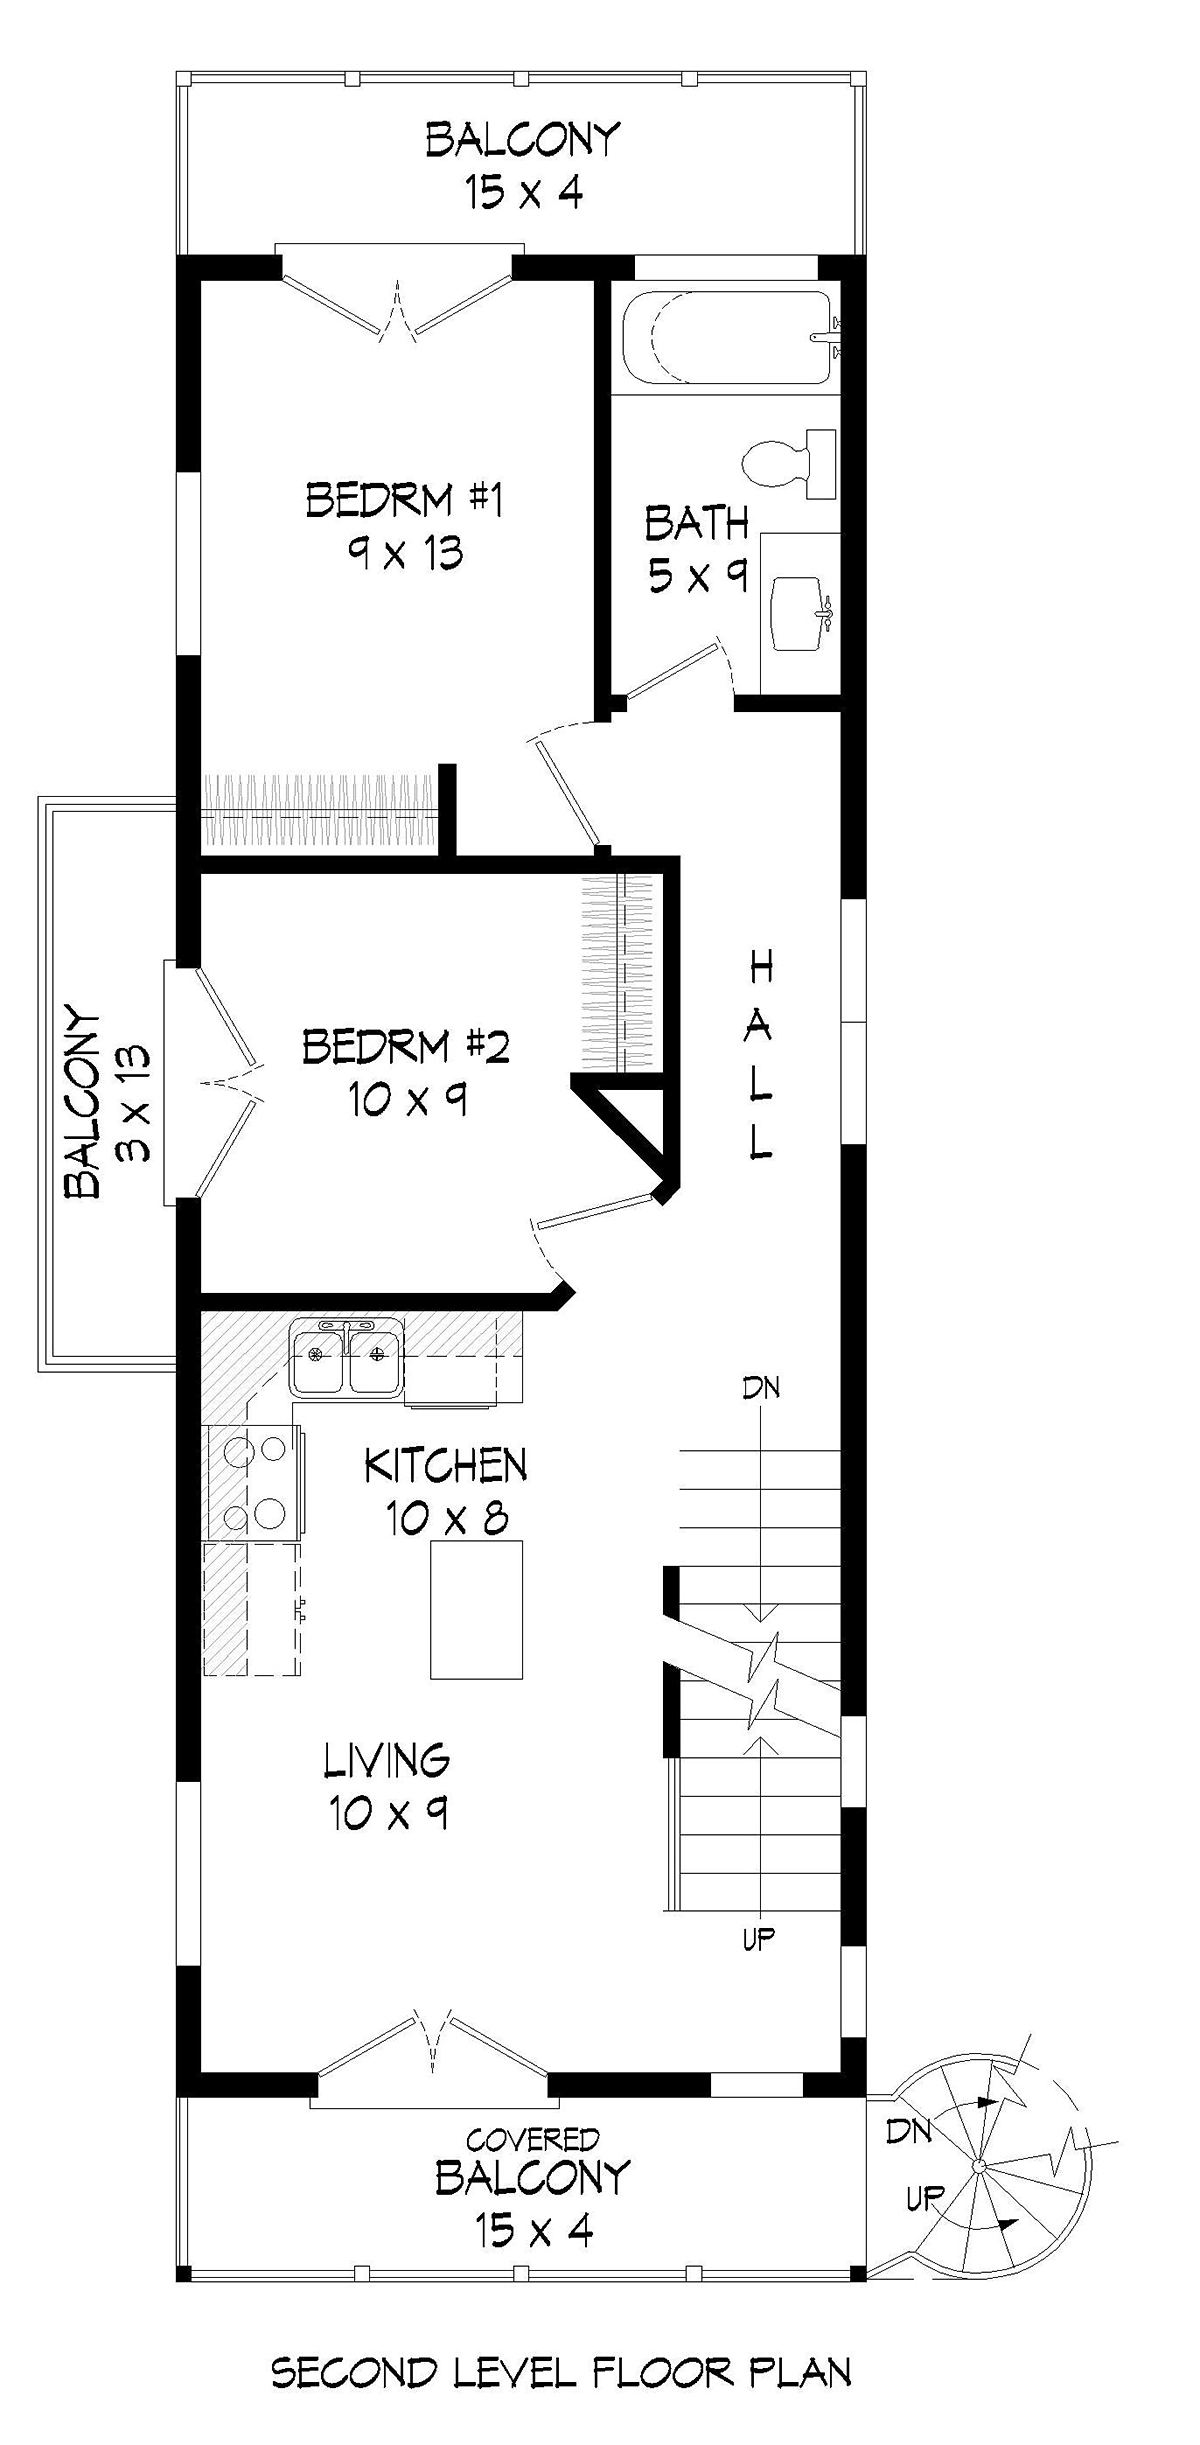 House Plan 40839 Narrow Lot Style With 740 Sq Ft 2 Bed 1 Bath,Hanging Curtains From Ceiling To Floor